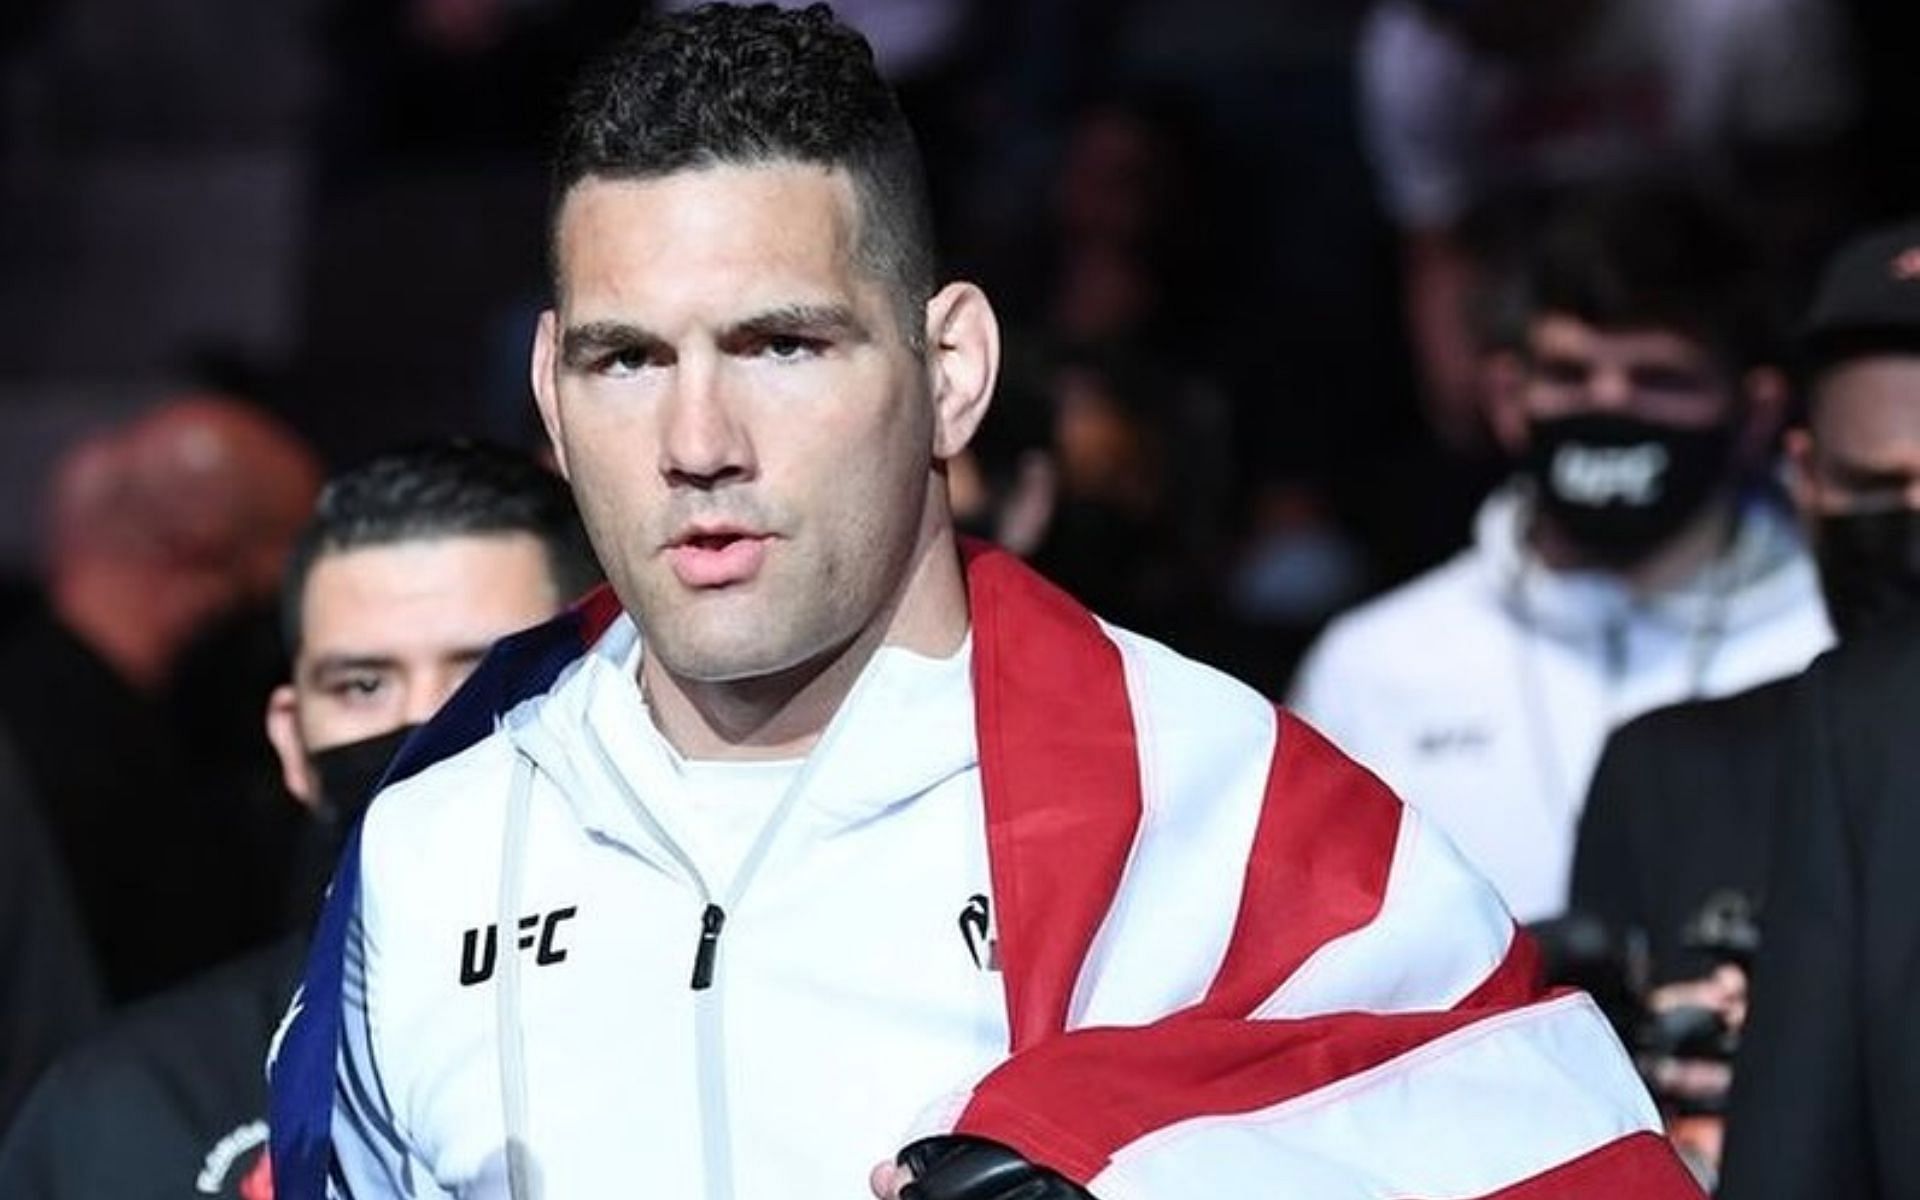 Chris Weidman initially contemplated retirement at UFC Atlantic City, but one pivotal factor altered his decision